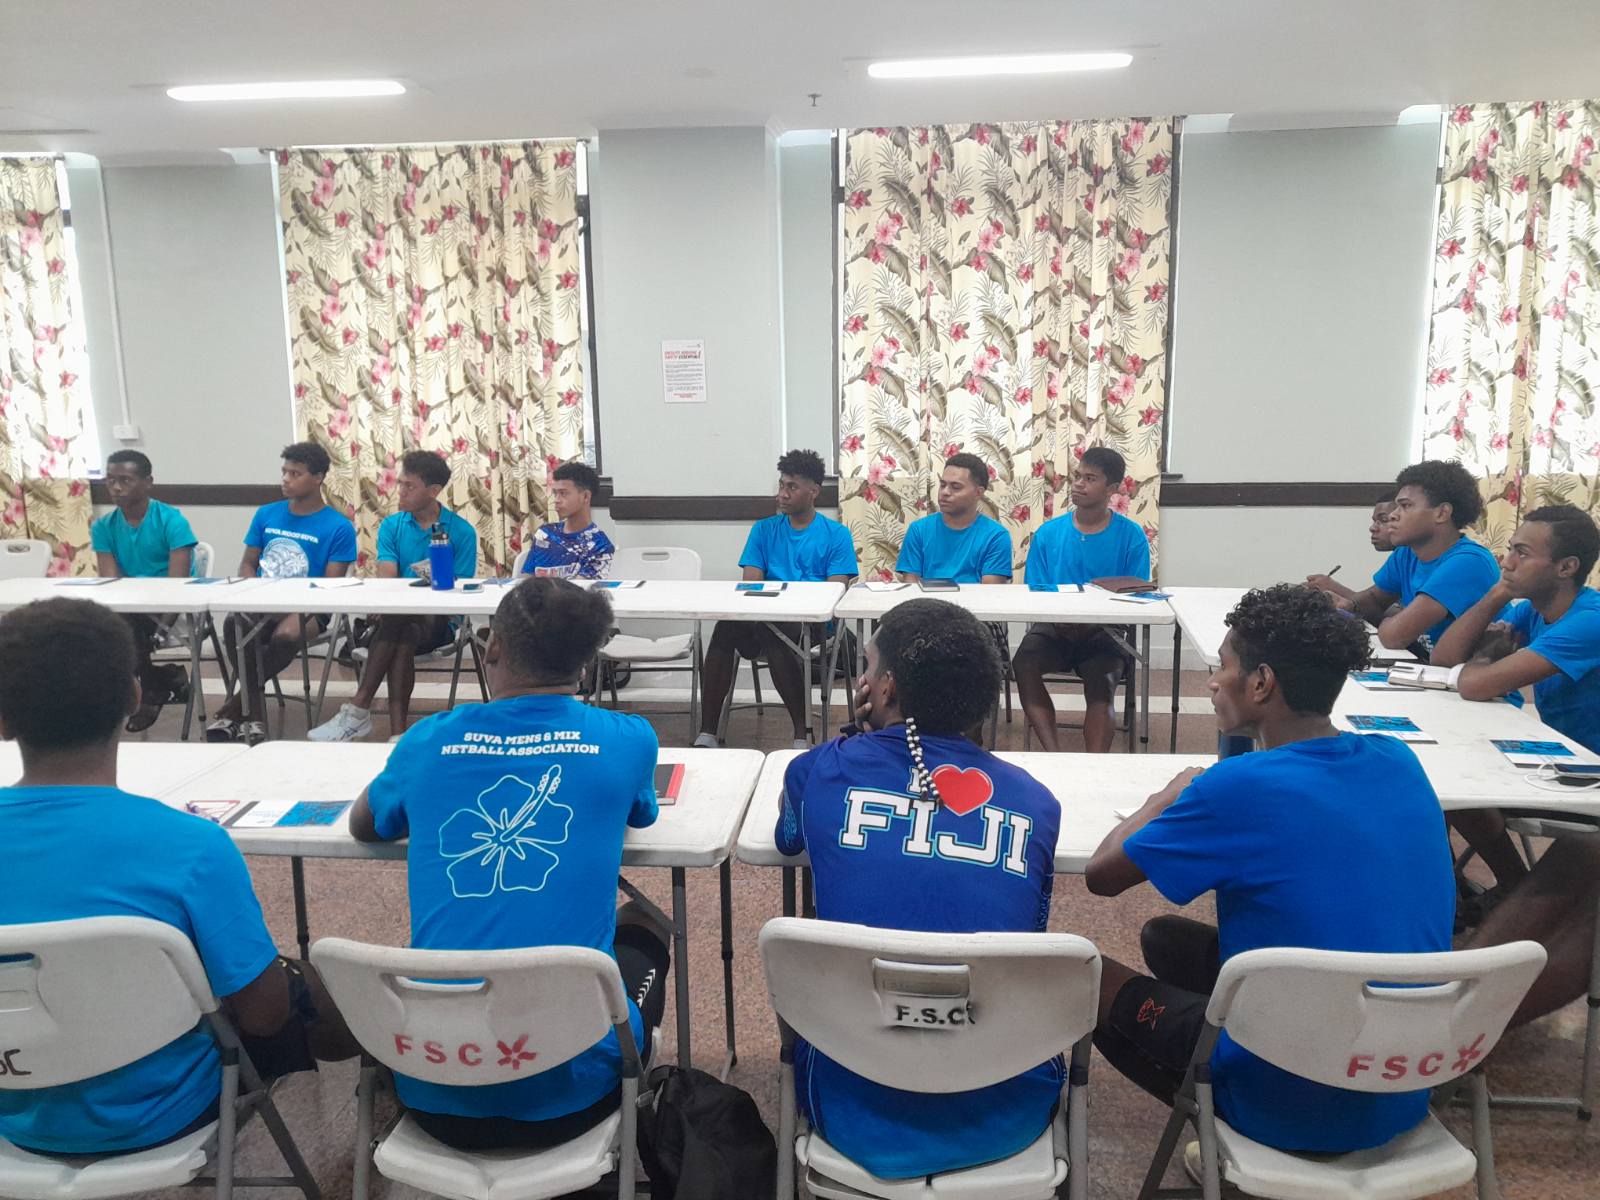 Fiji Men’s 23&U gearing up as training partner to the Baby Pearls ...